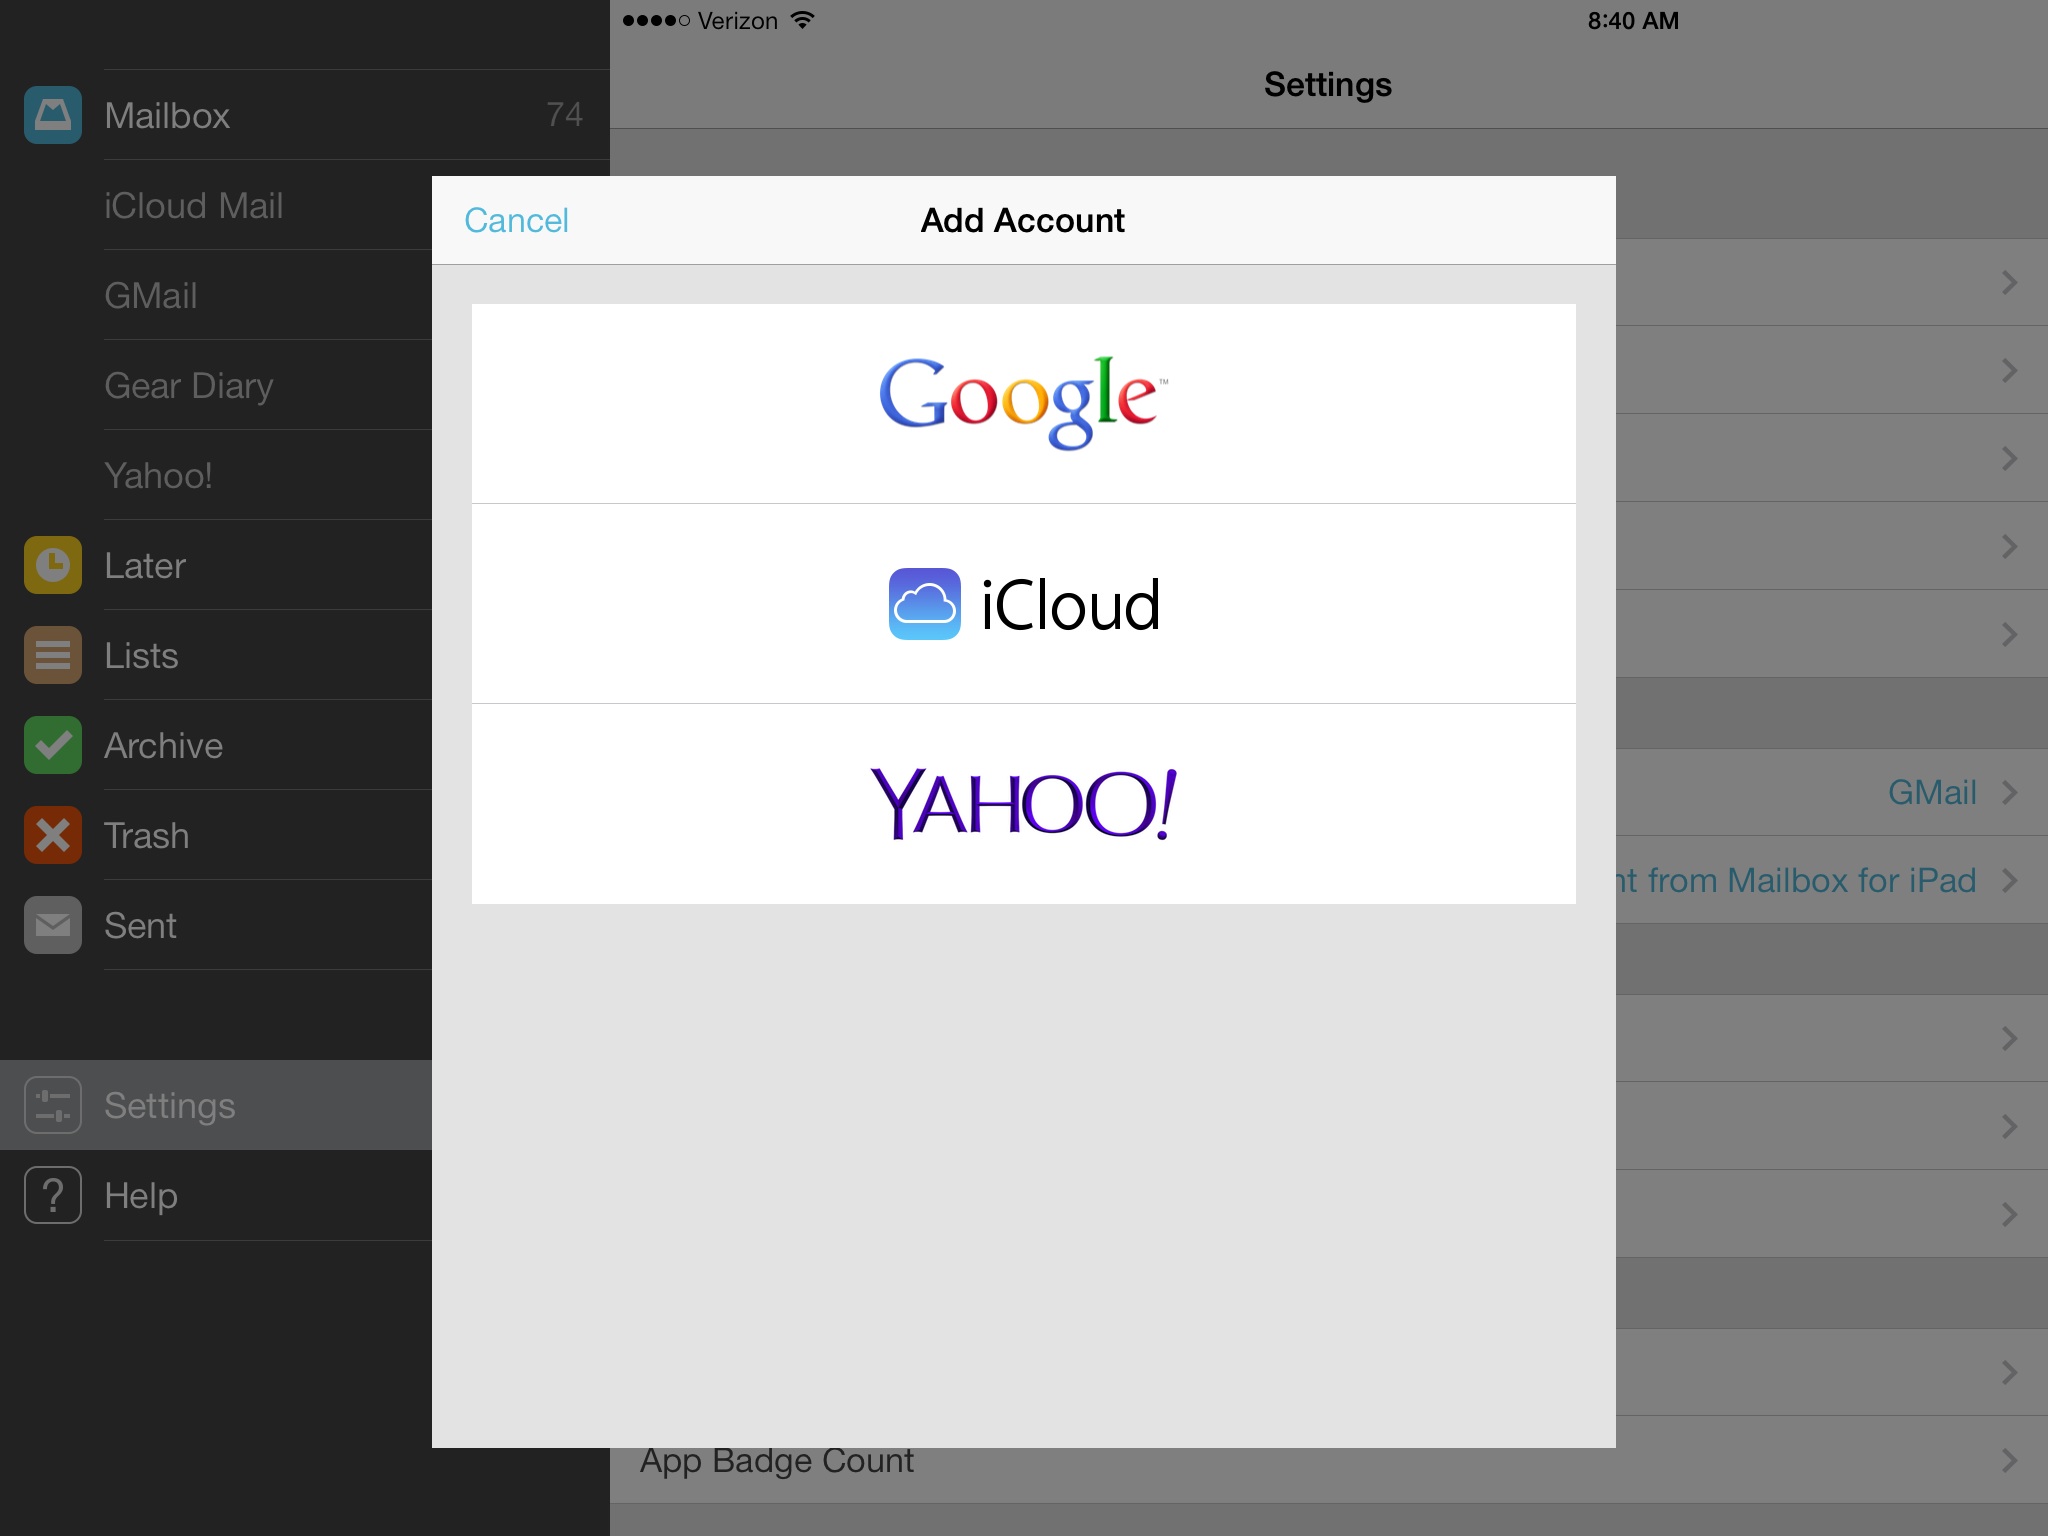 Mailbox Becomes More Universal, Adds iCloud and Yahoo! Mail!